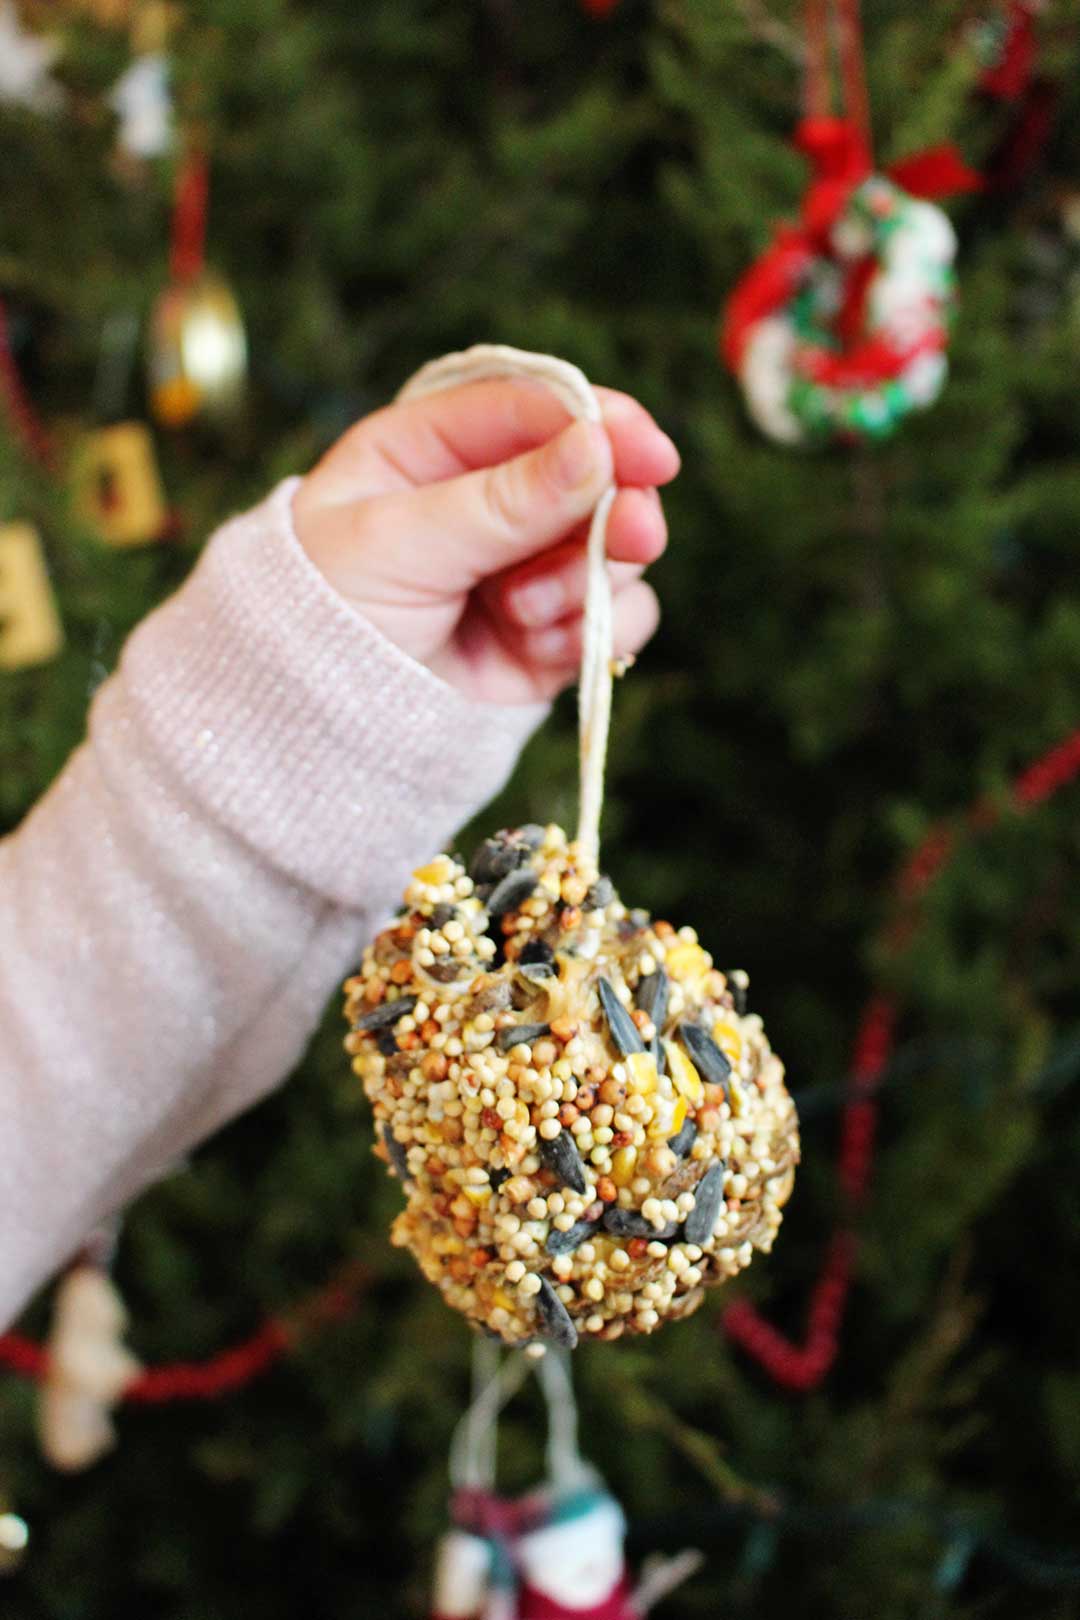 Little hand holding finished pine cone bird feeder in front of Christmas tree